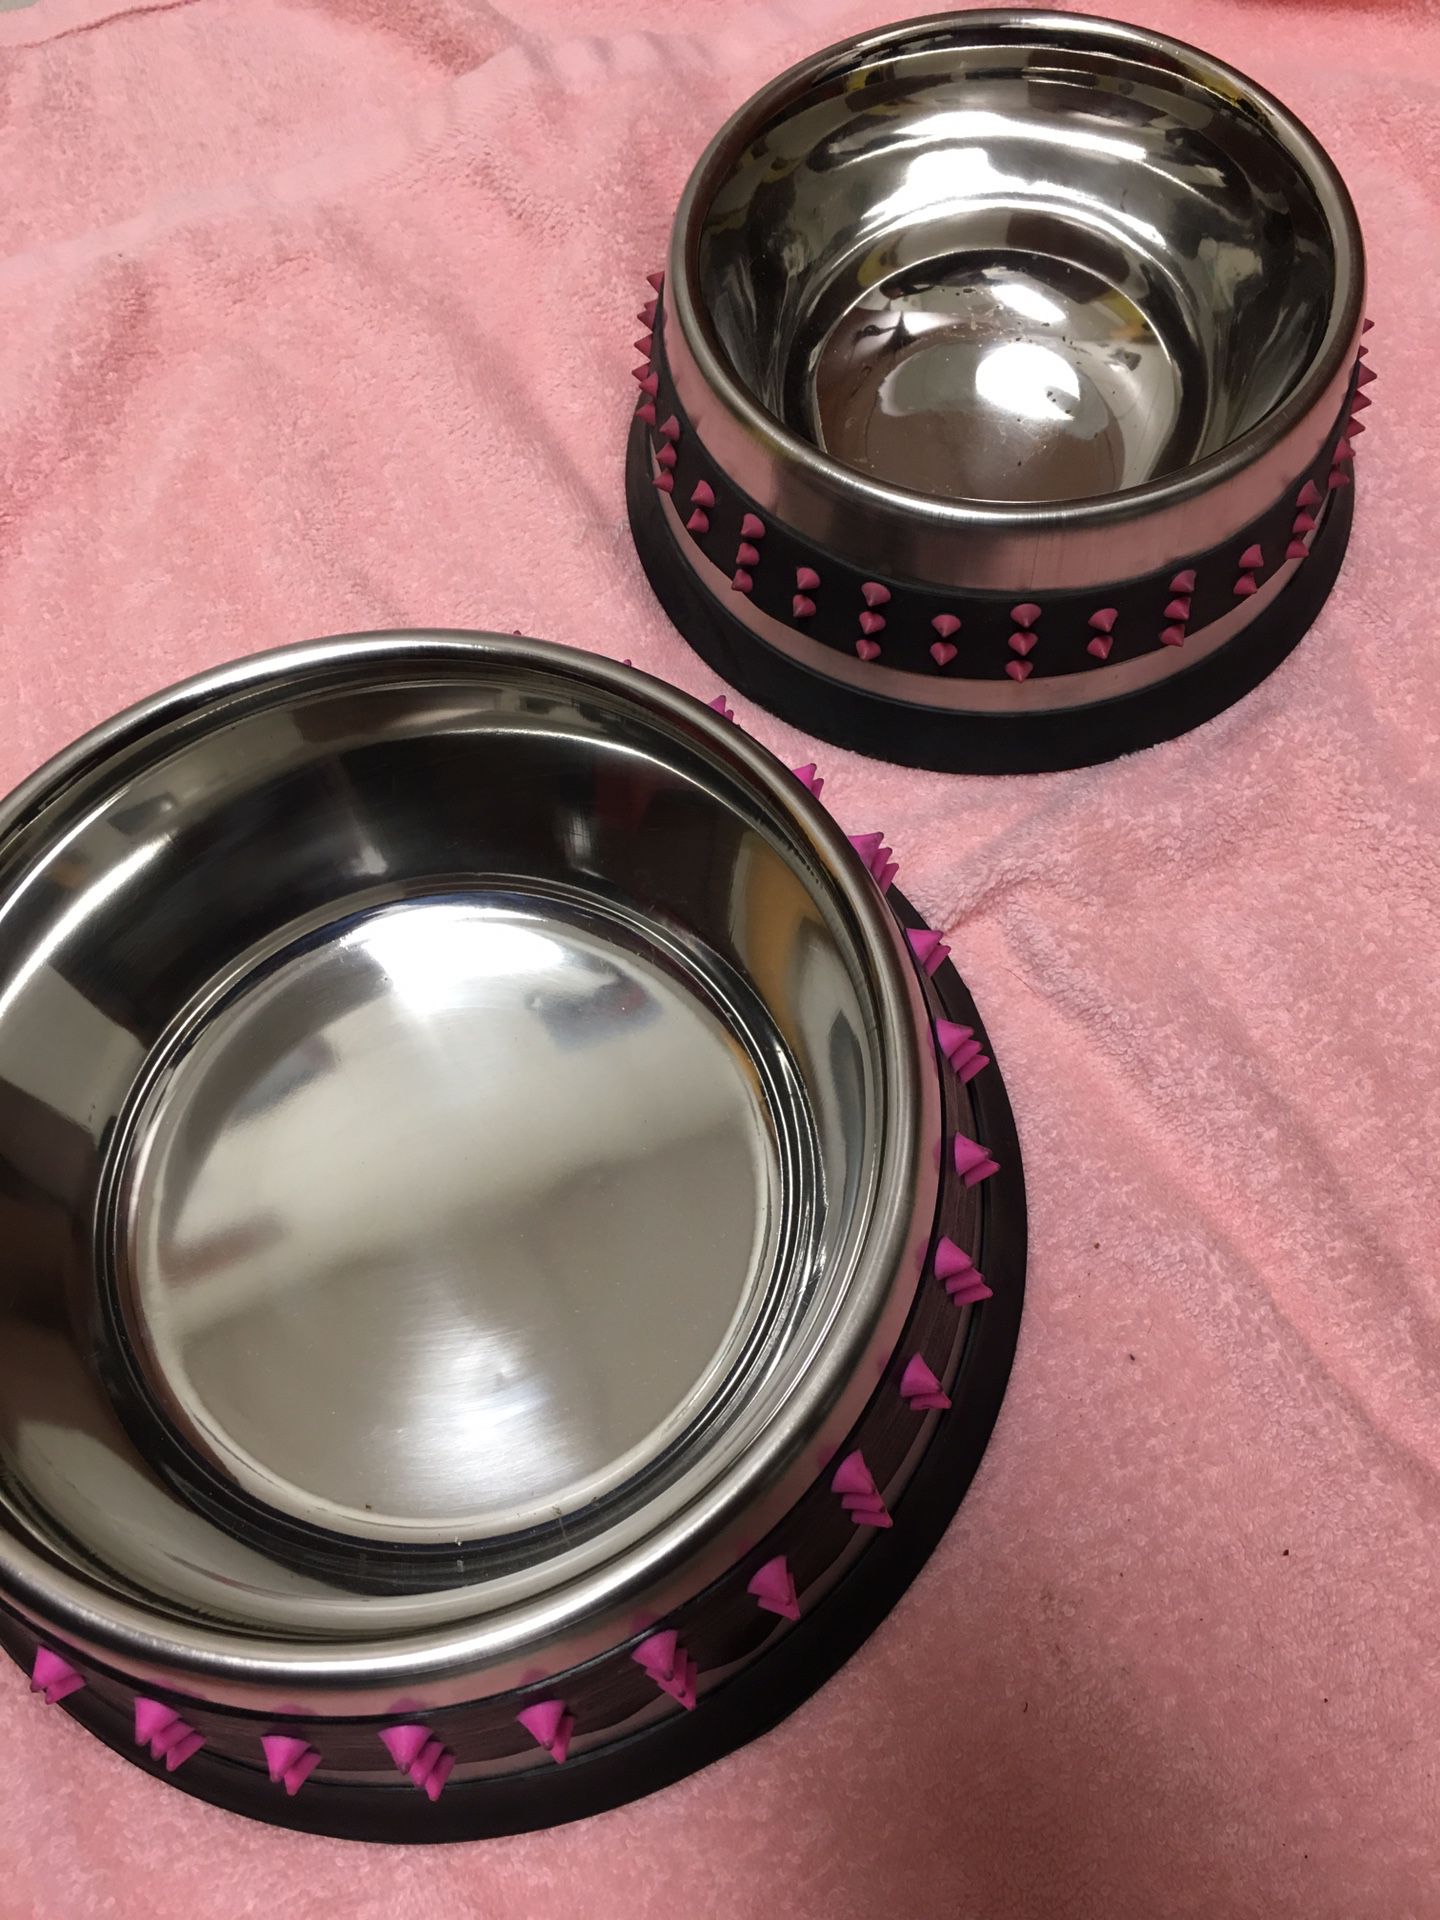 Stainless steal spill proof dog bowls